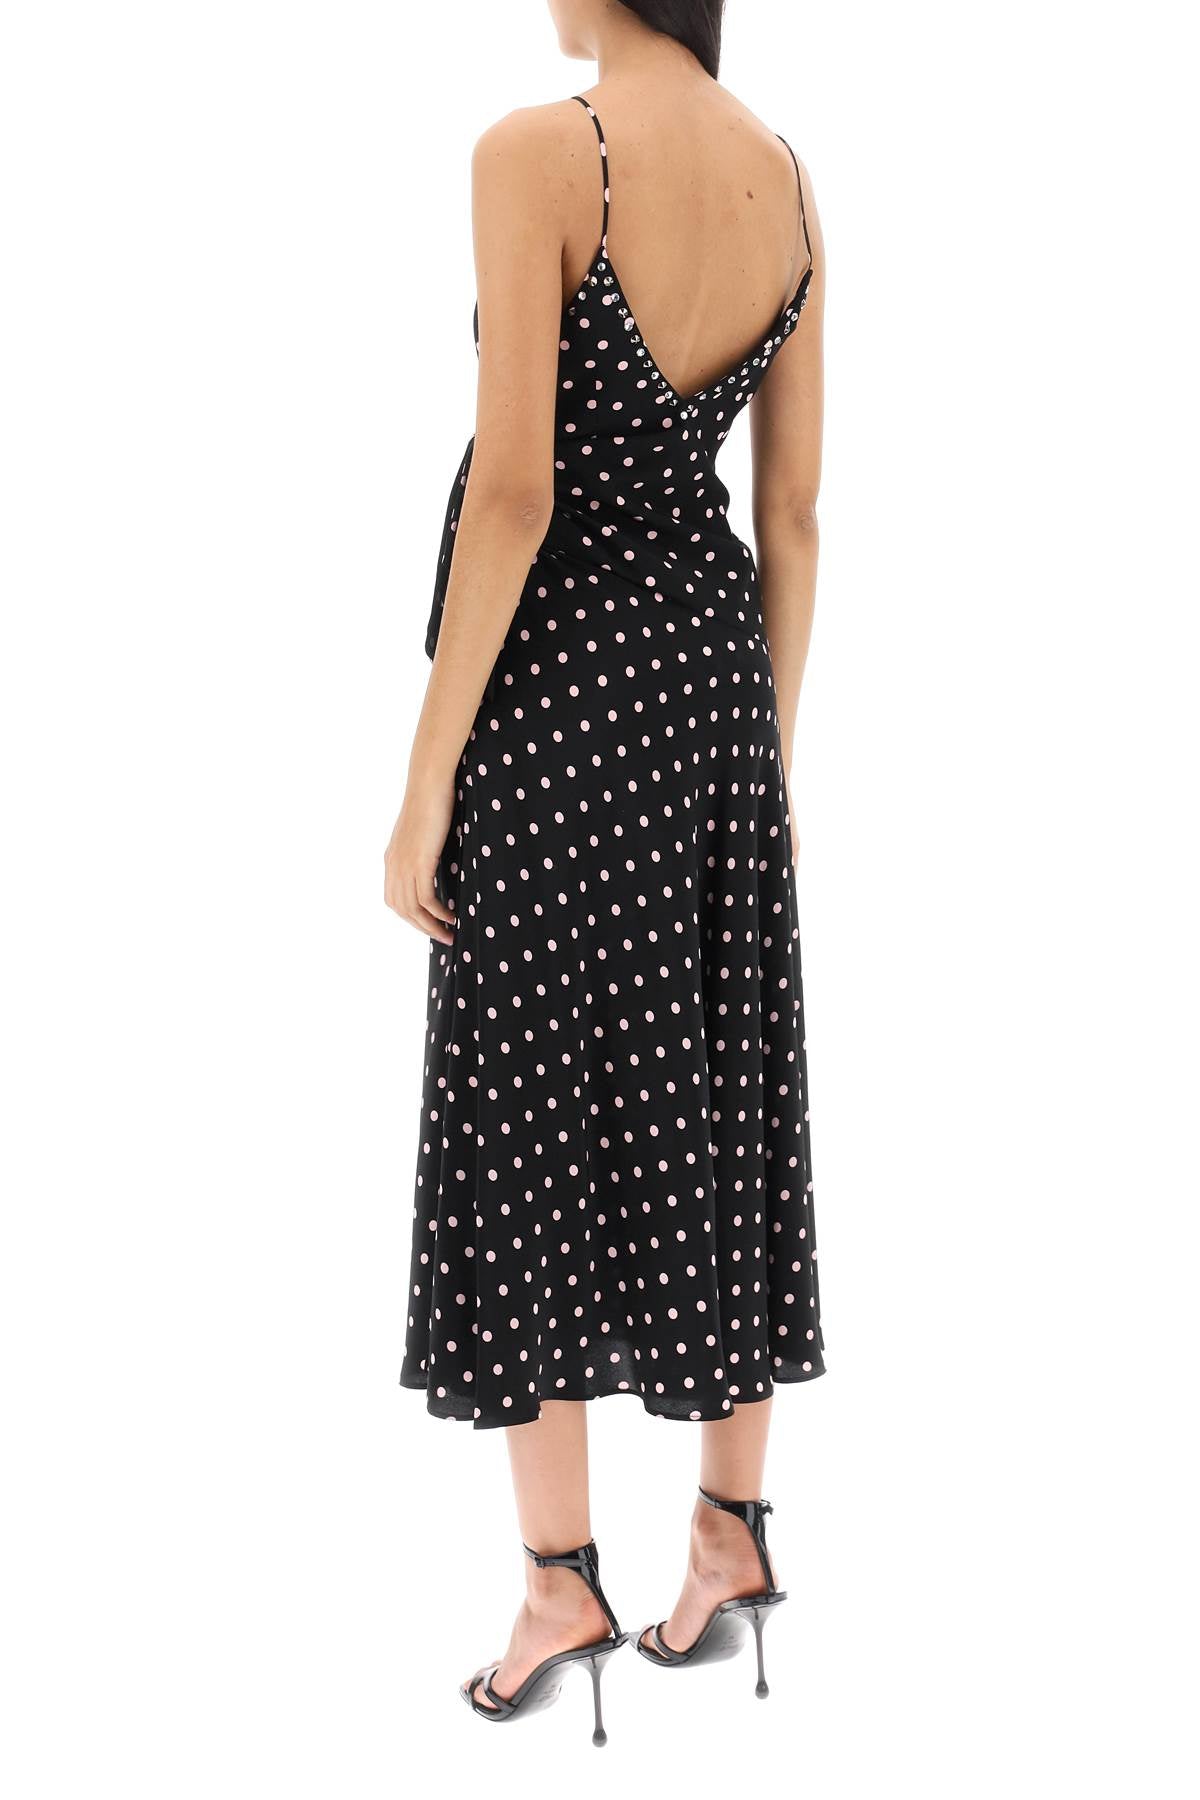 Shop Alessandra Rich Polka Dot Slip Dress With Studs And Rhinestones In Black, Pink